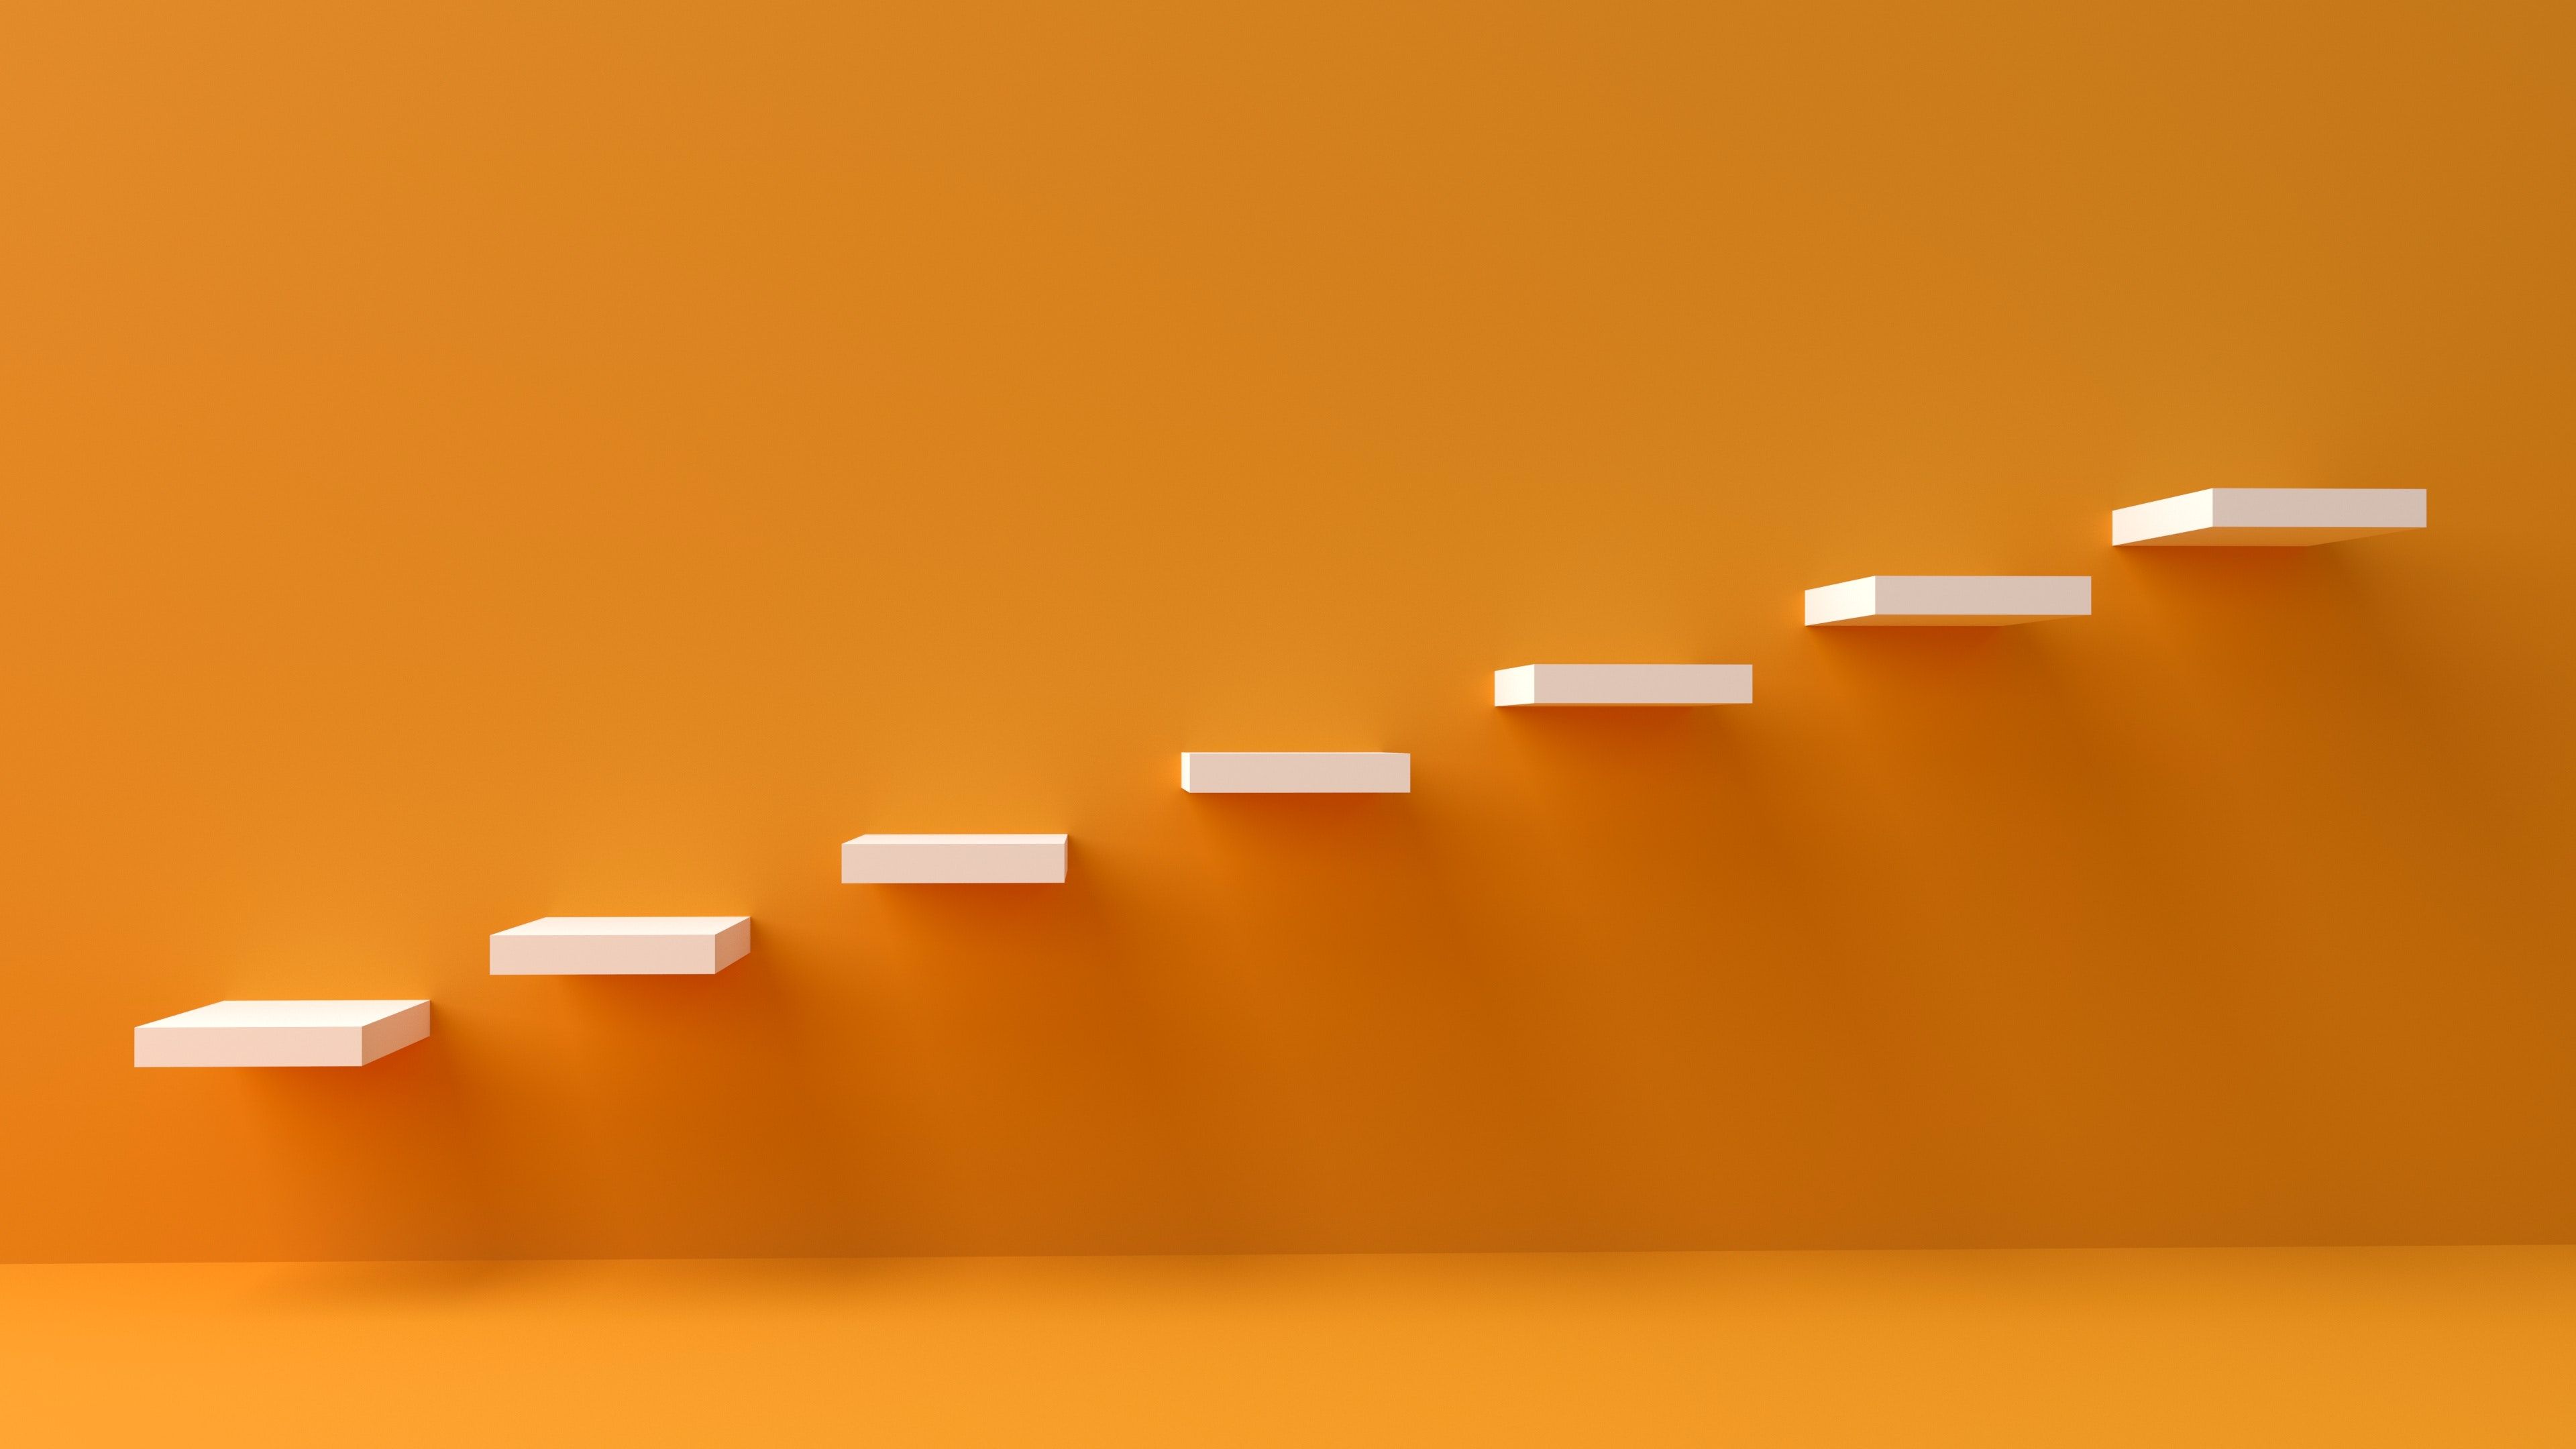 Photo of stairs designed in a modern fashion over an orange background